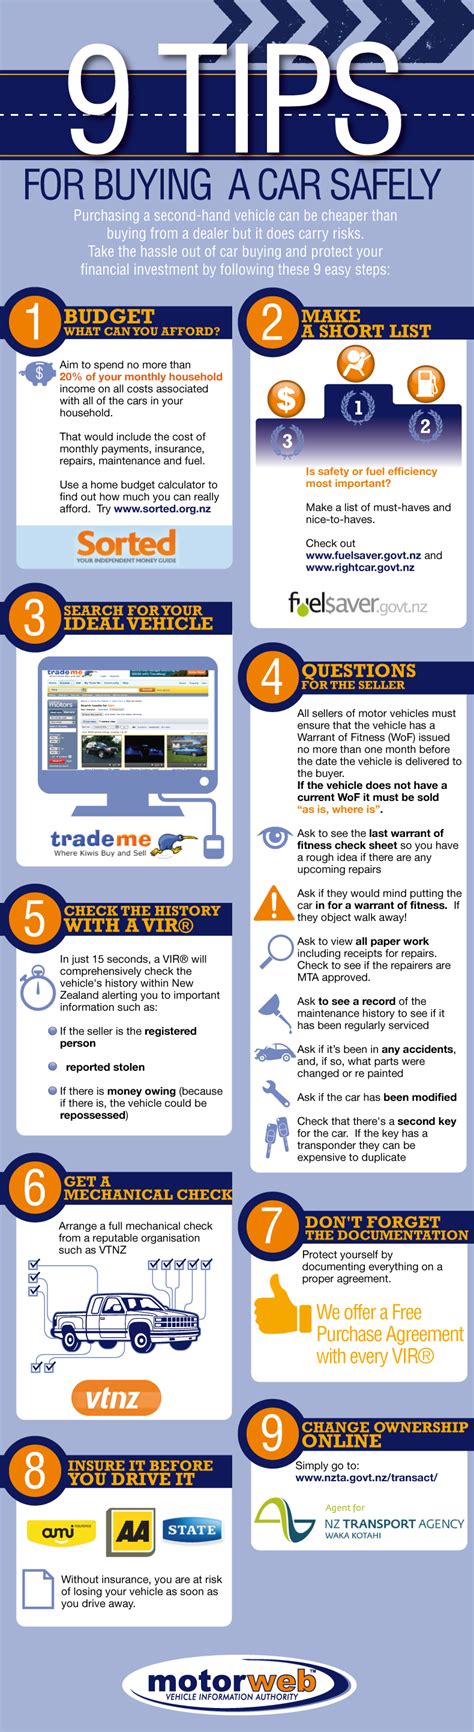 9 Tips For Buy A Car Safely Motorweb™ Nz